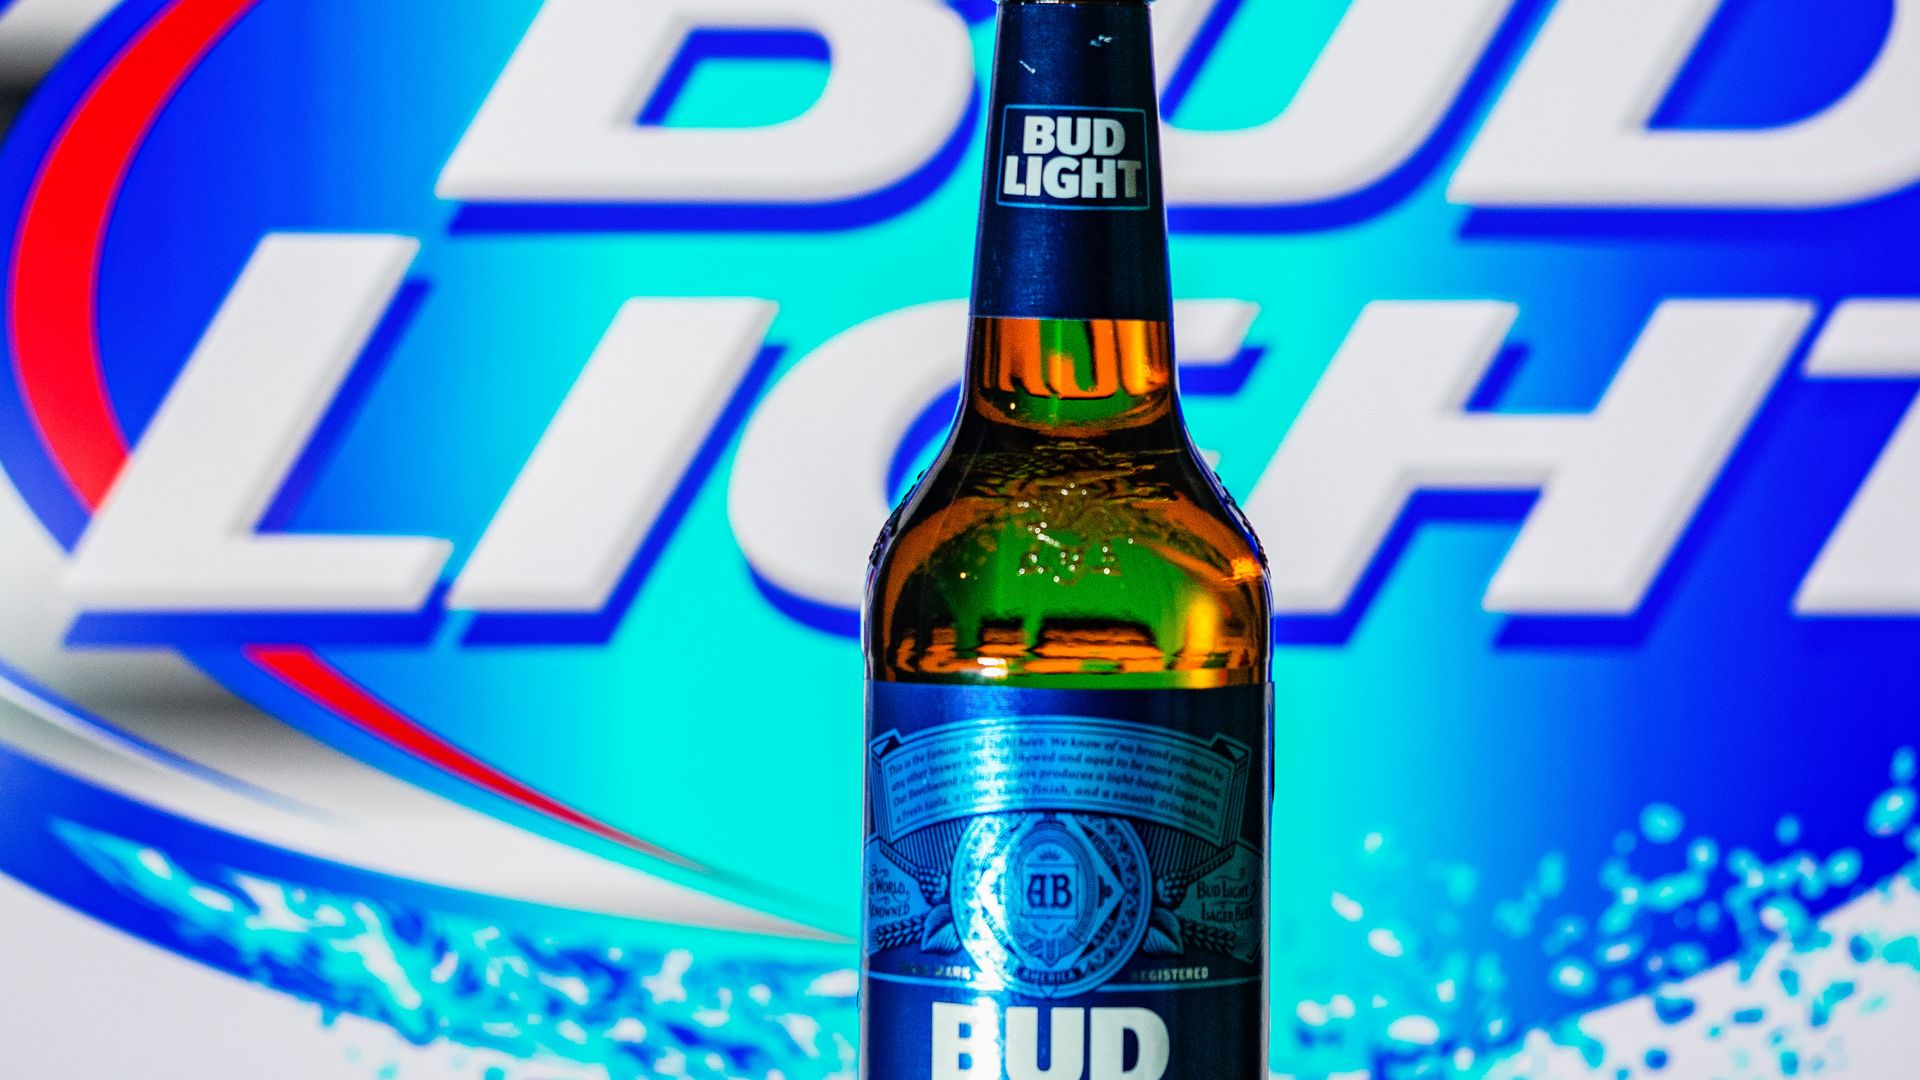 NFL legends Peyton Manning and Emmitt Smith are part of Bud Light's mission to host their largest ever NFL postseason ticket giveaway.